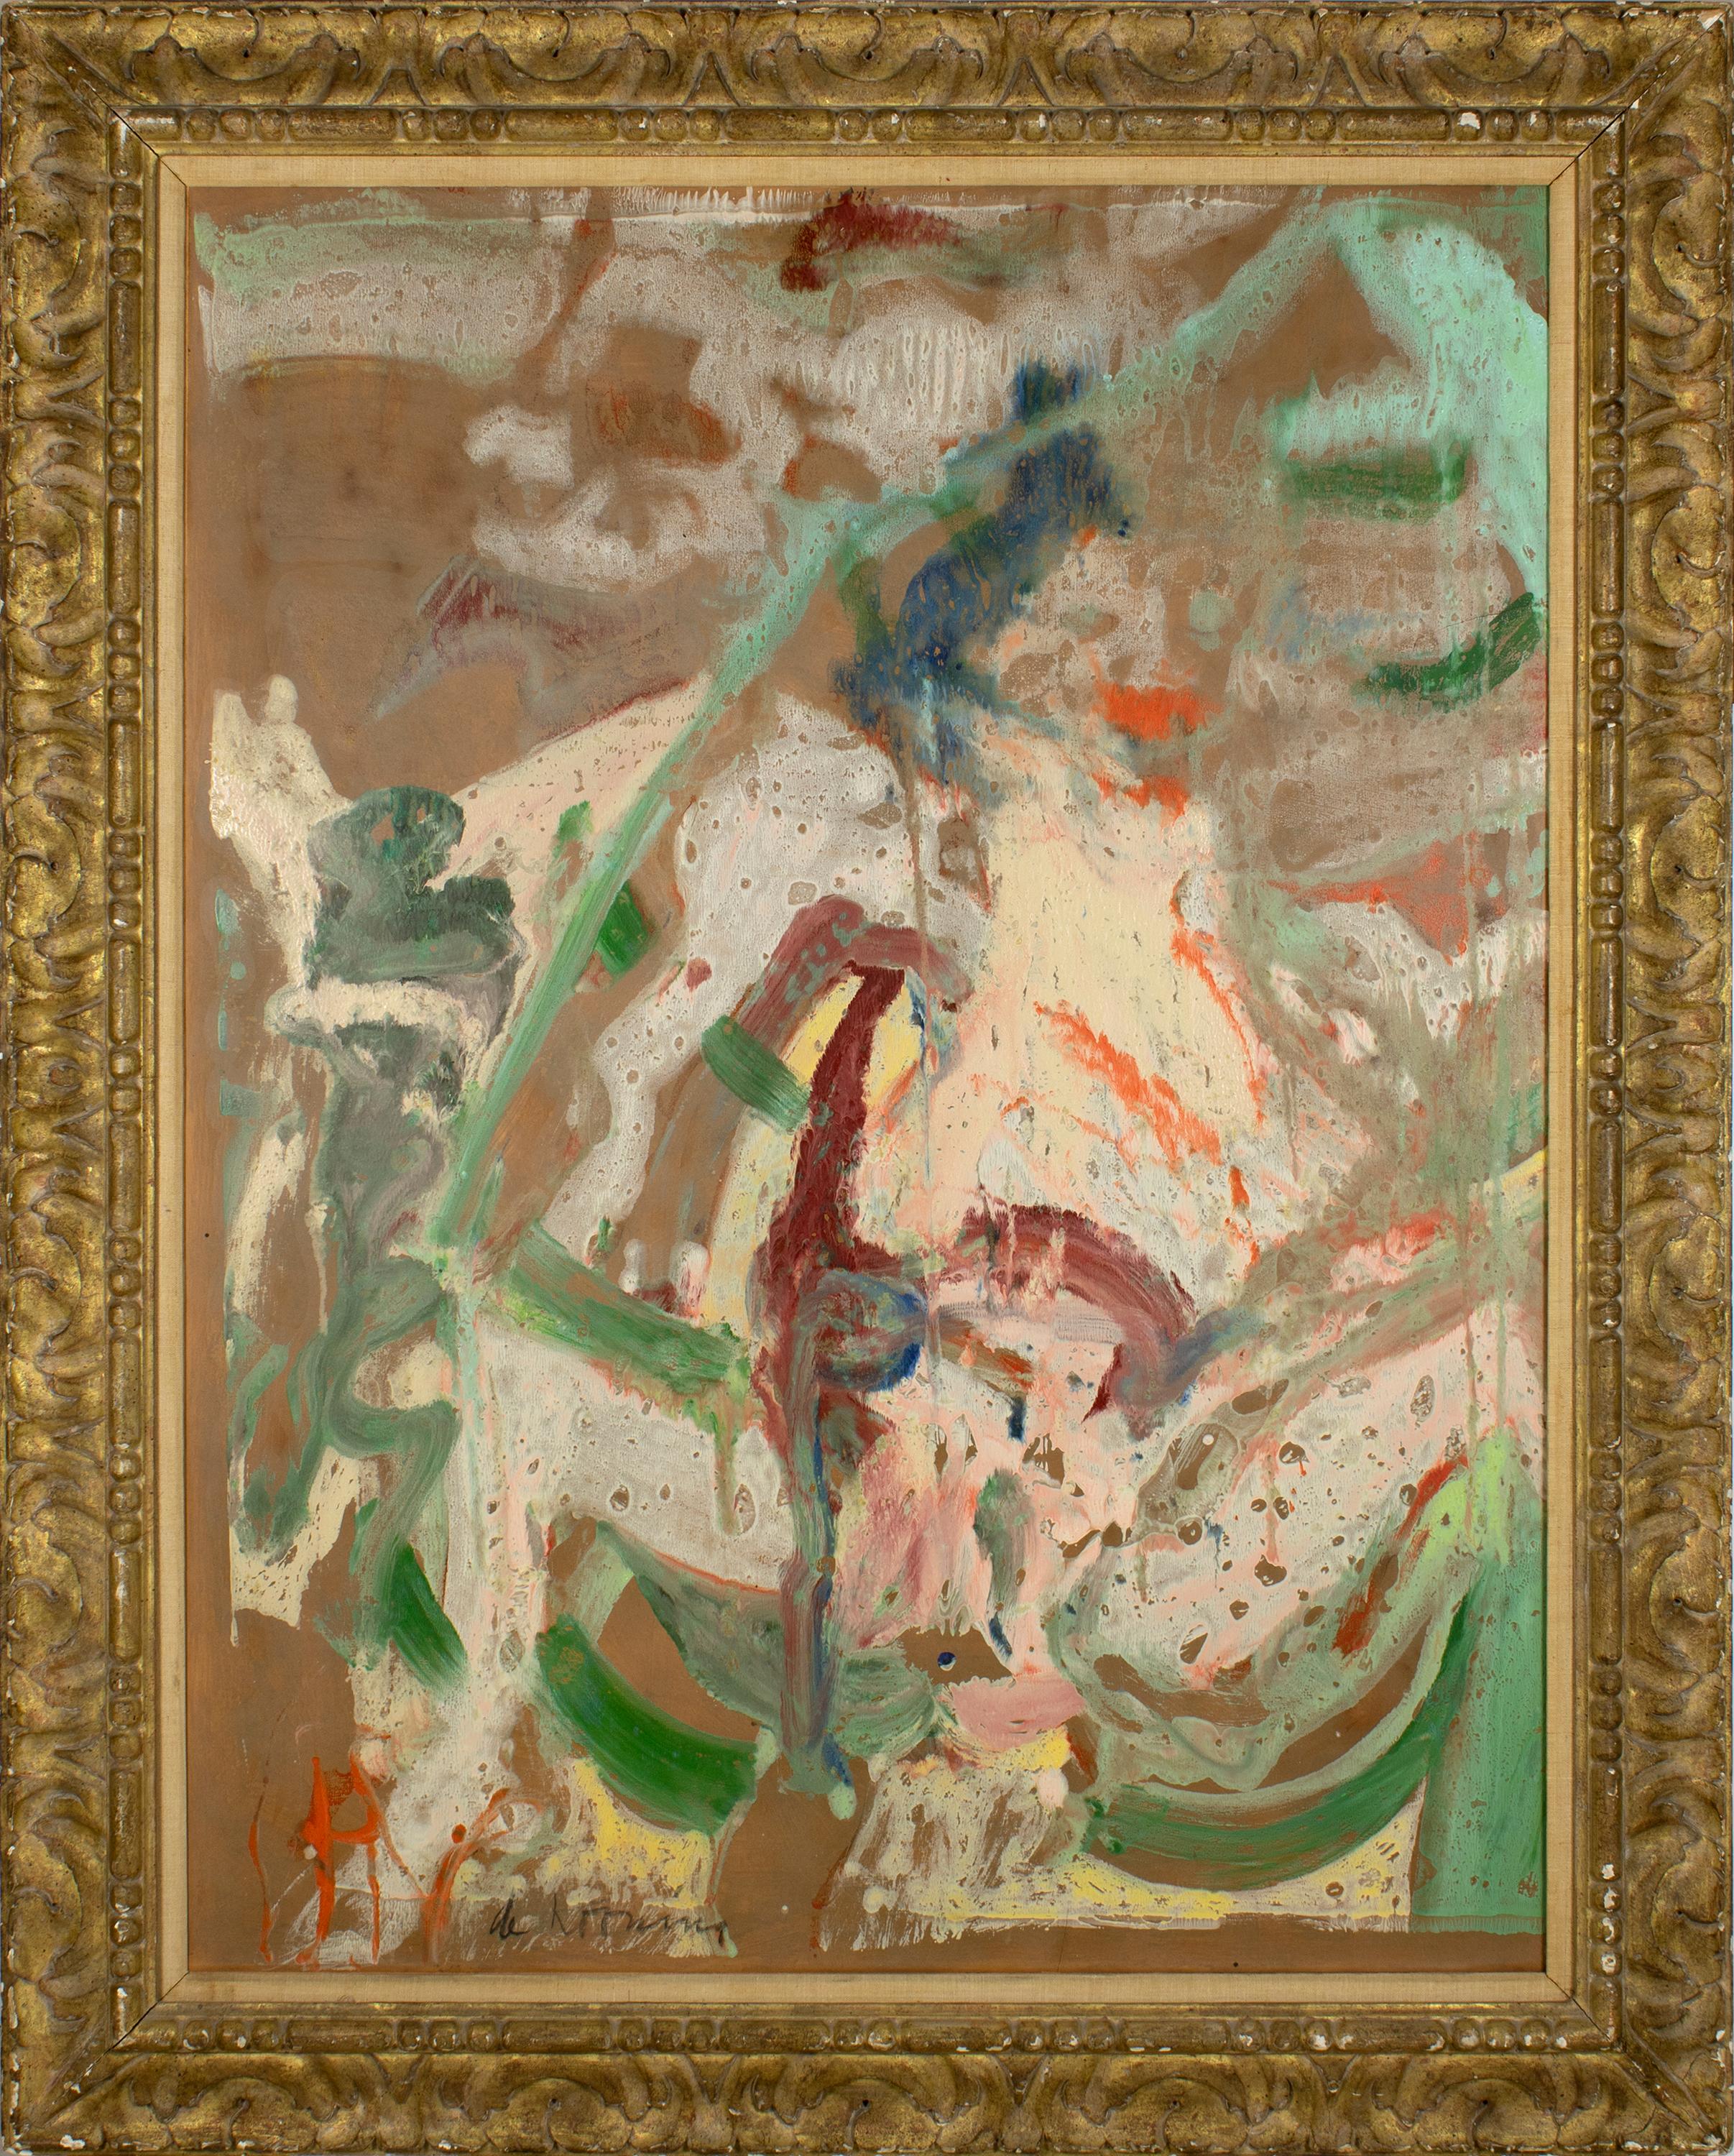 Woman in a Rowboat - Marron Abstract Painting par Willem de Kooning